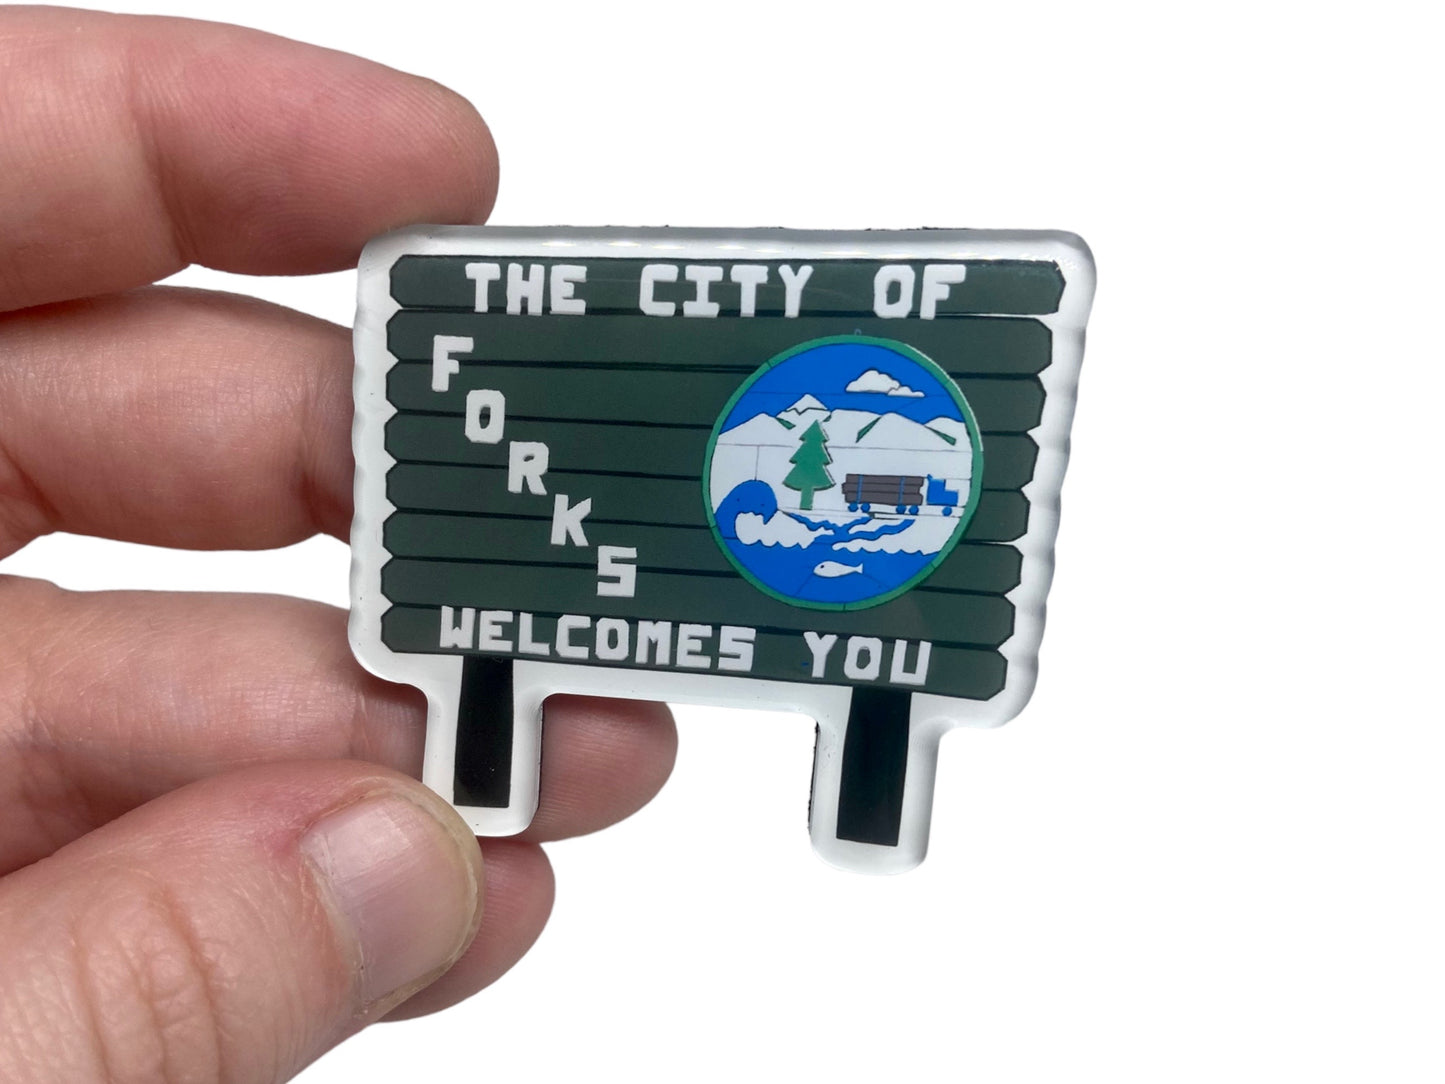 City of Forks Acrylic Magnet